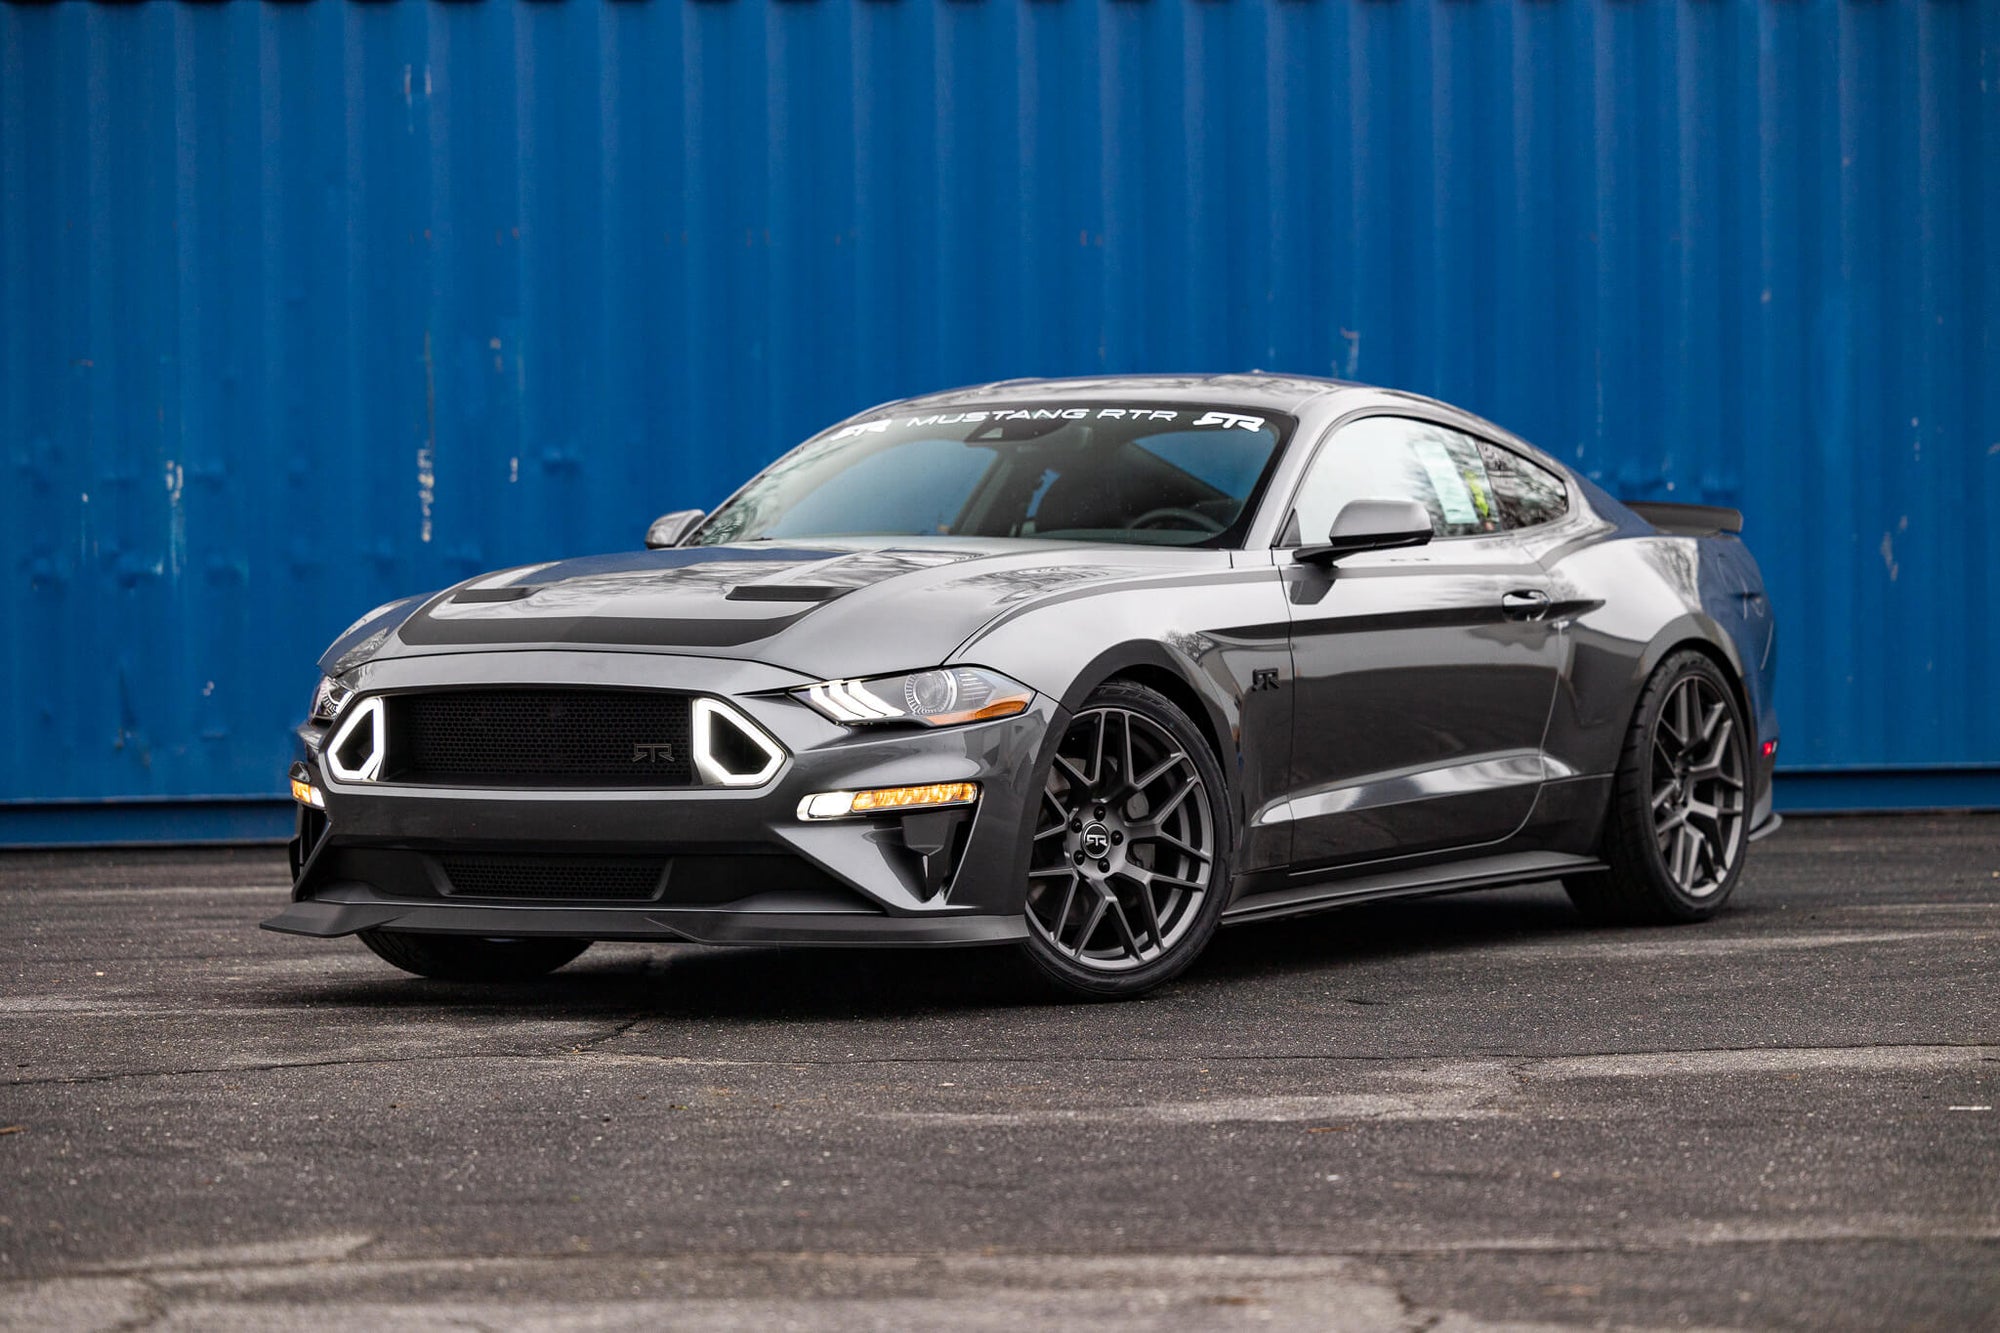 Fort Mill Ford Sells Their First RTR Mustang